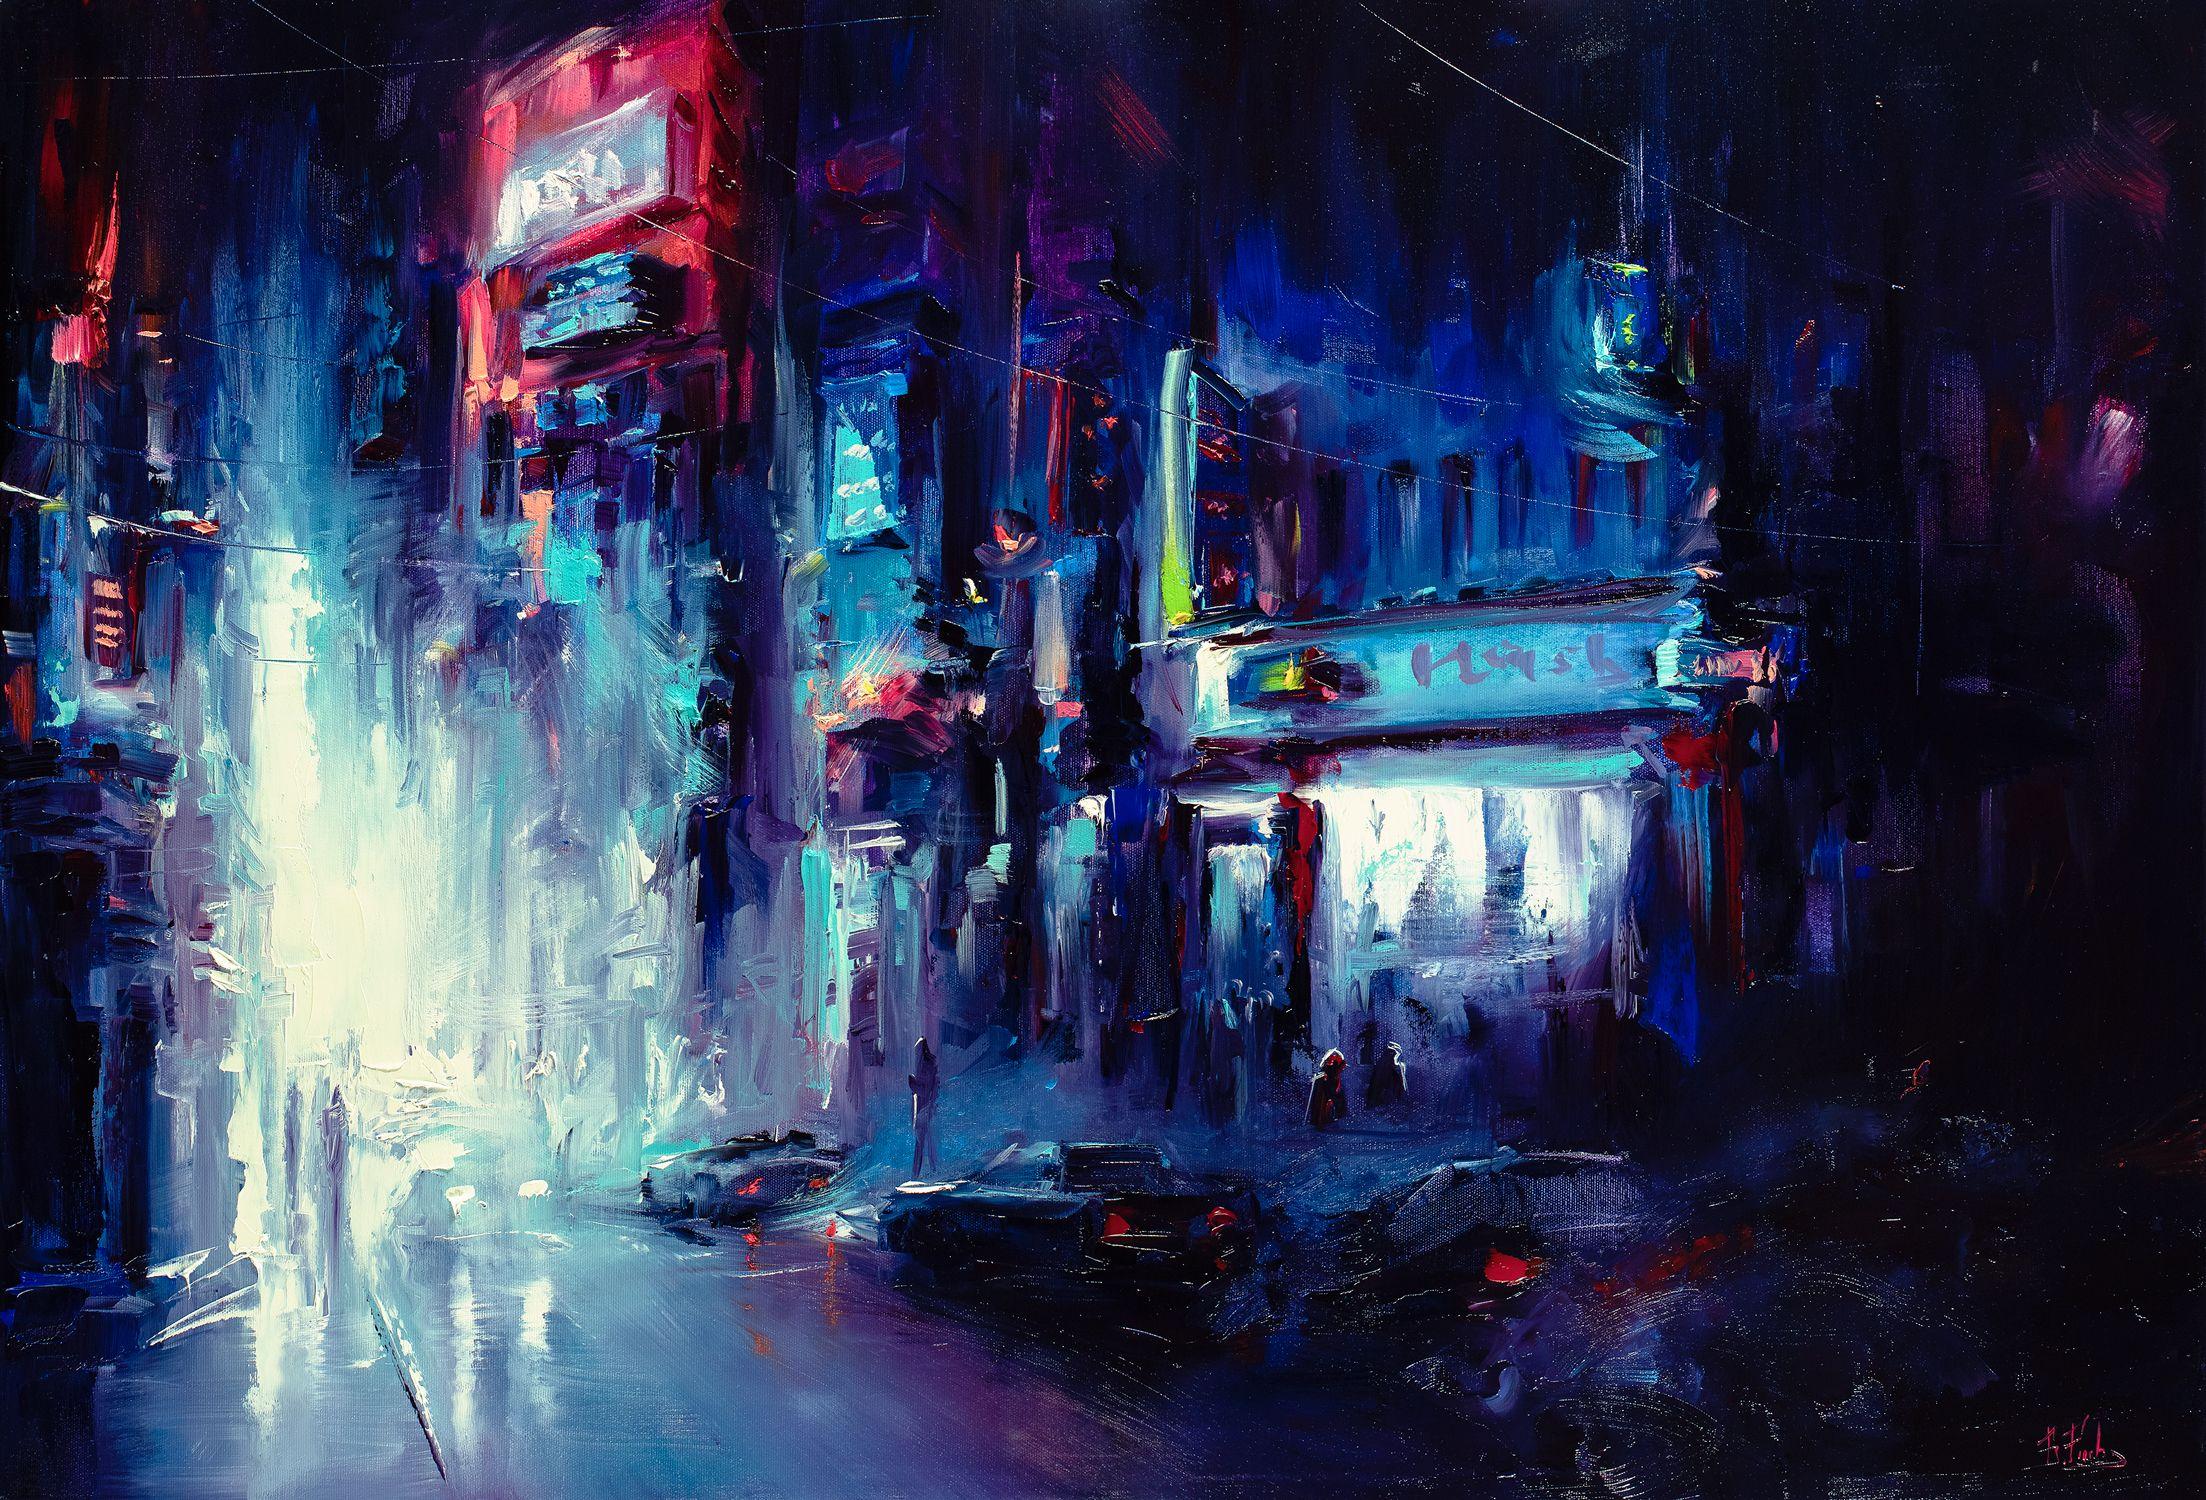 Inspired by a night life, neon light effects and cyber city. Oil on canvas, Alla prima technique.   :: Painting :: Contemporary :: This piece comes with an official certificate of authenticity signed by the artist :: Ready to Hang: Yes :: Signed: